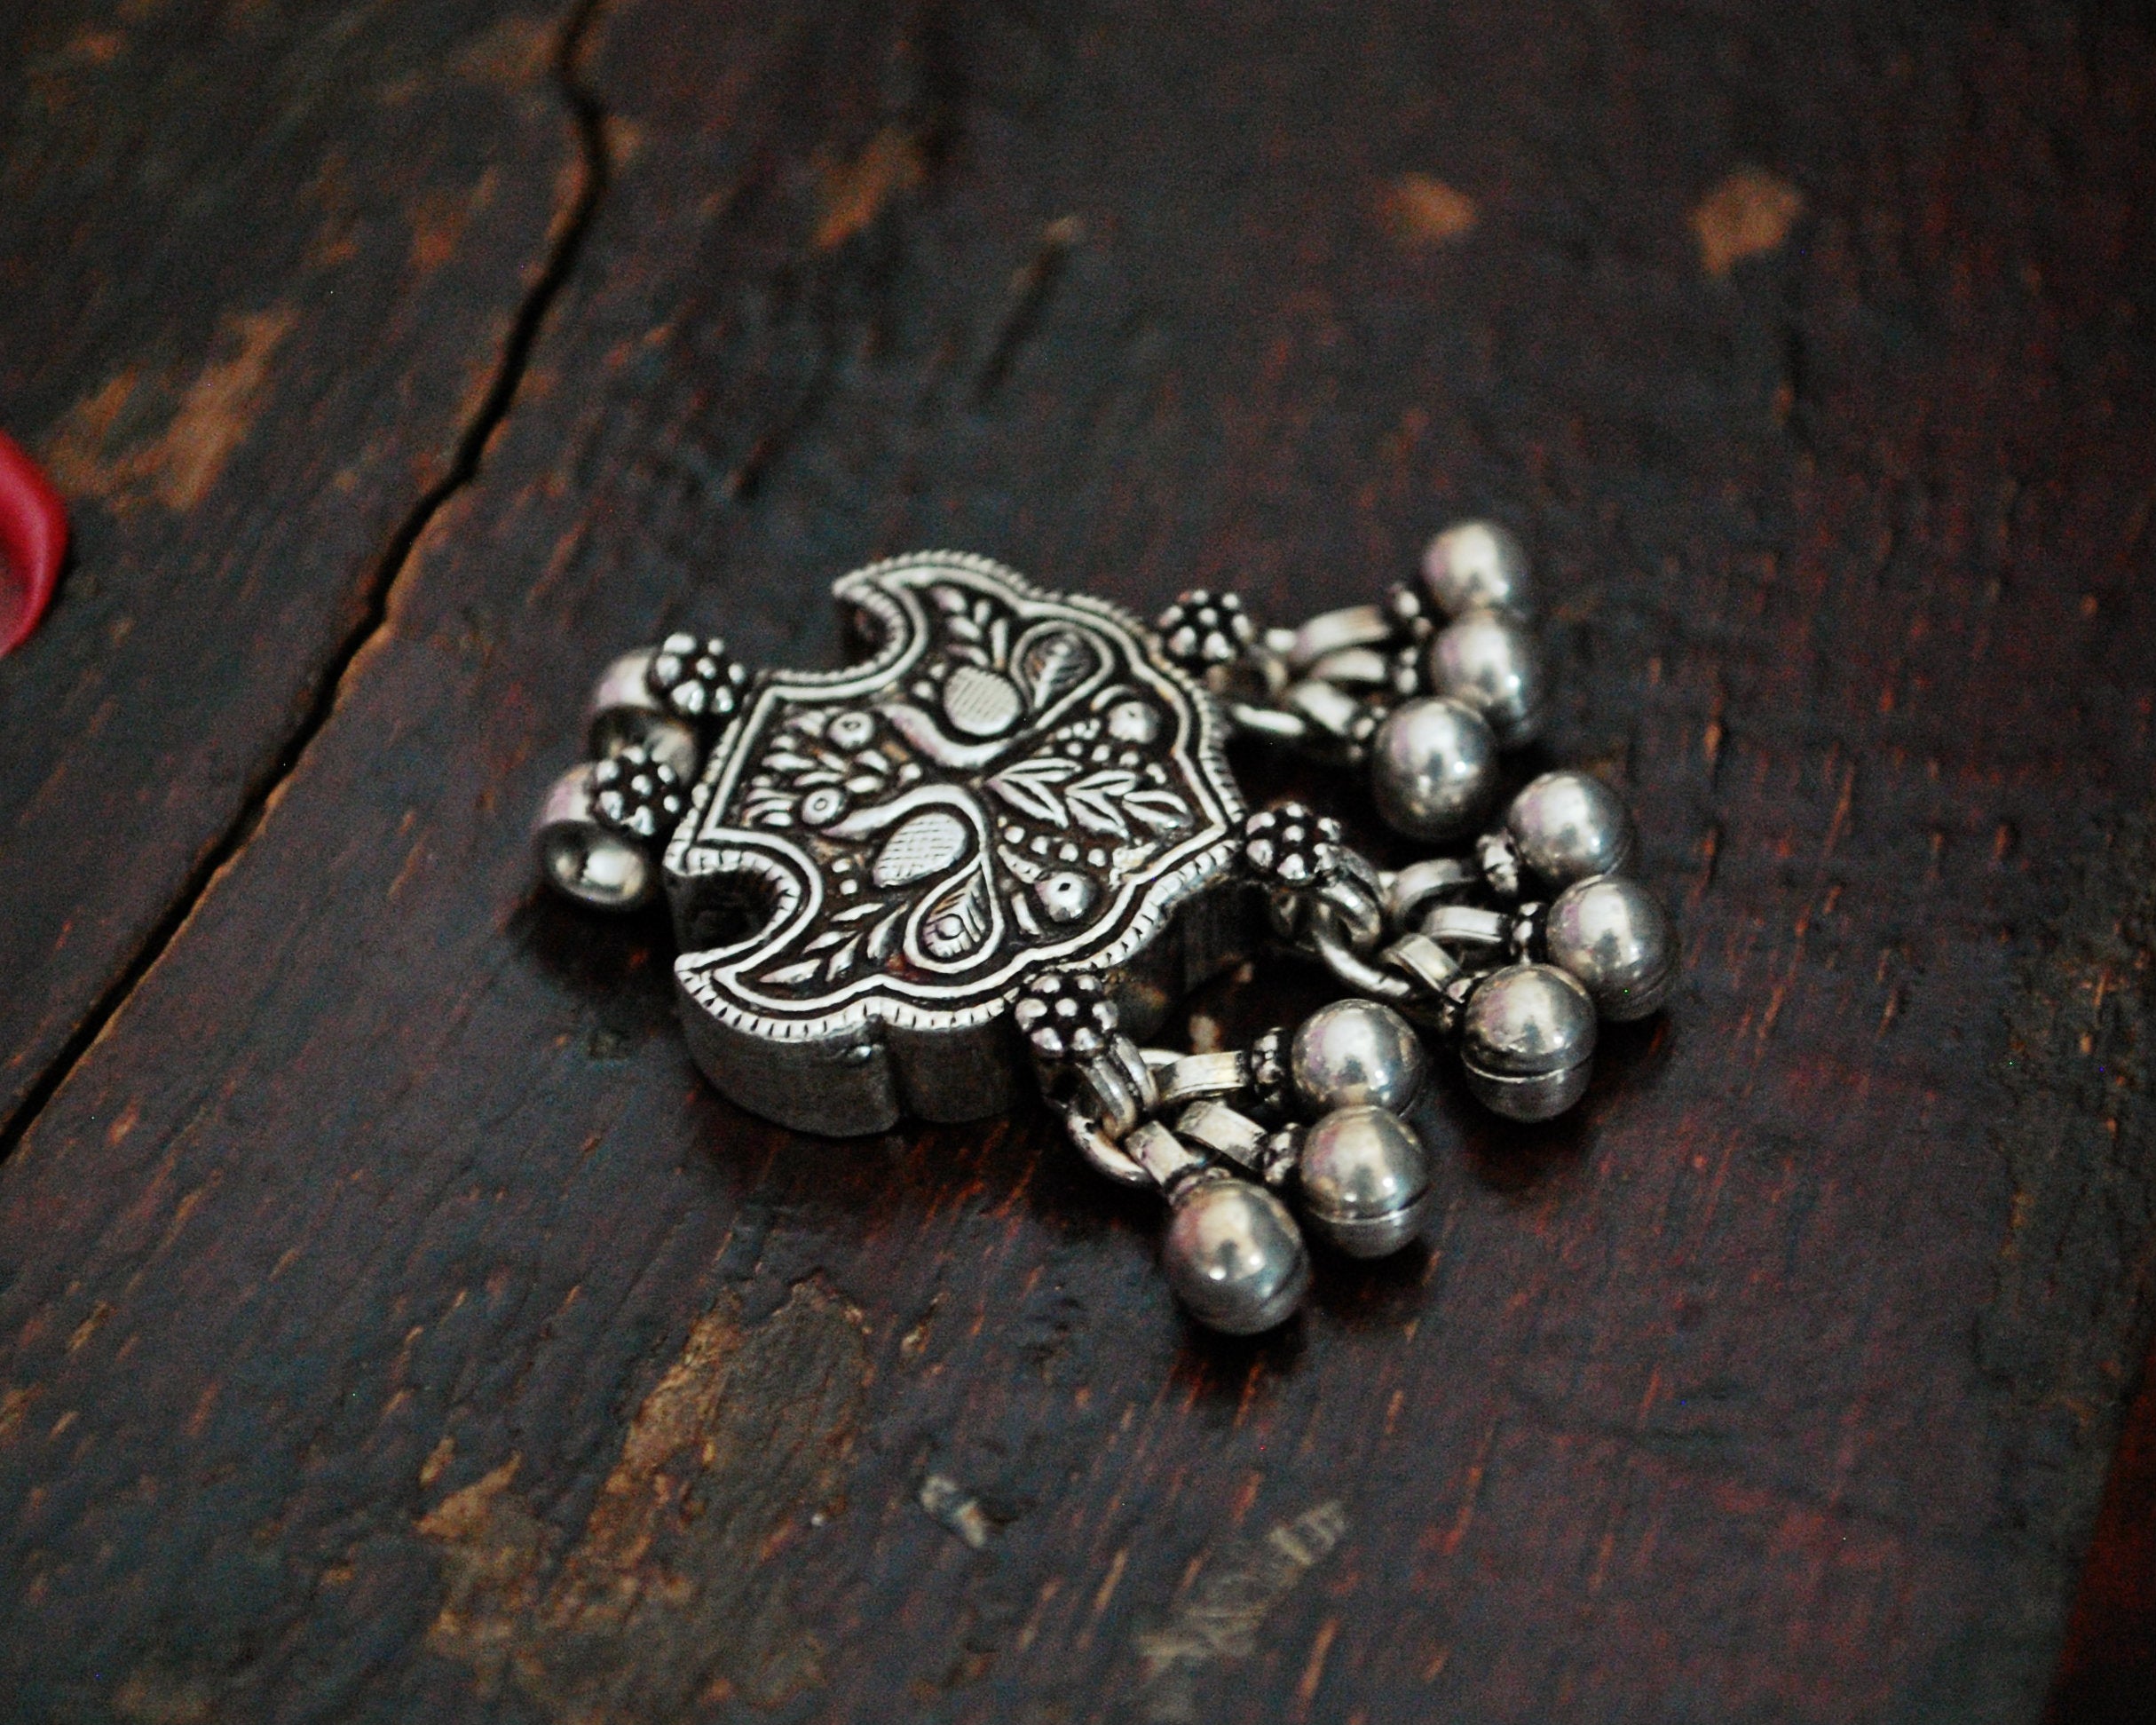 Rajasthani Silver Peacock Pendant with Bells